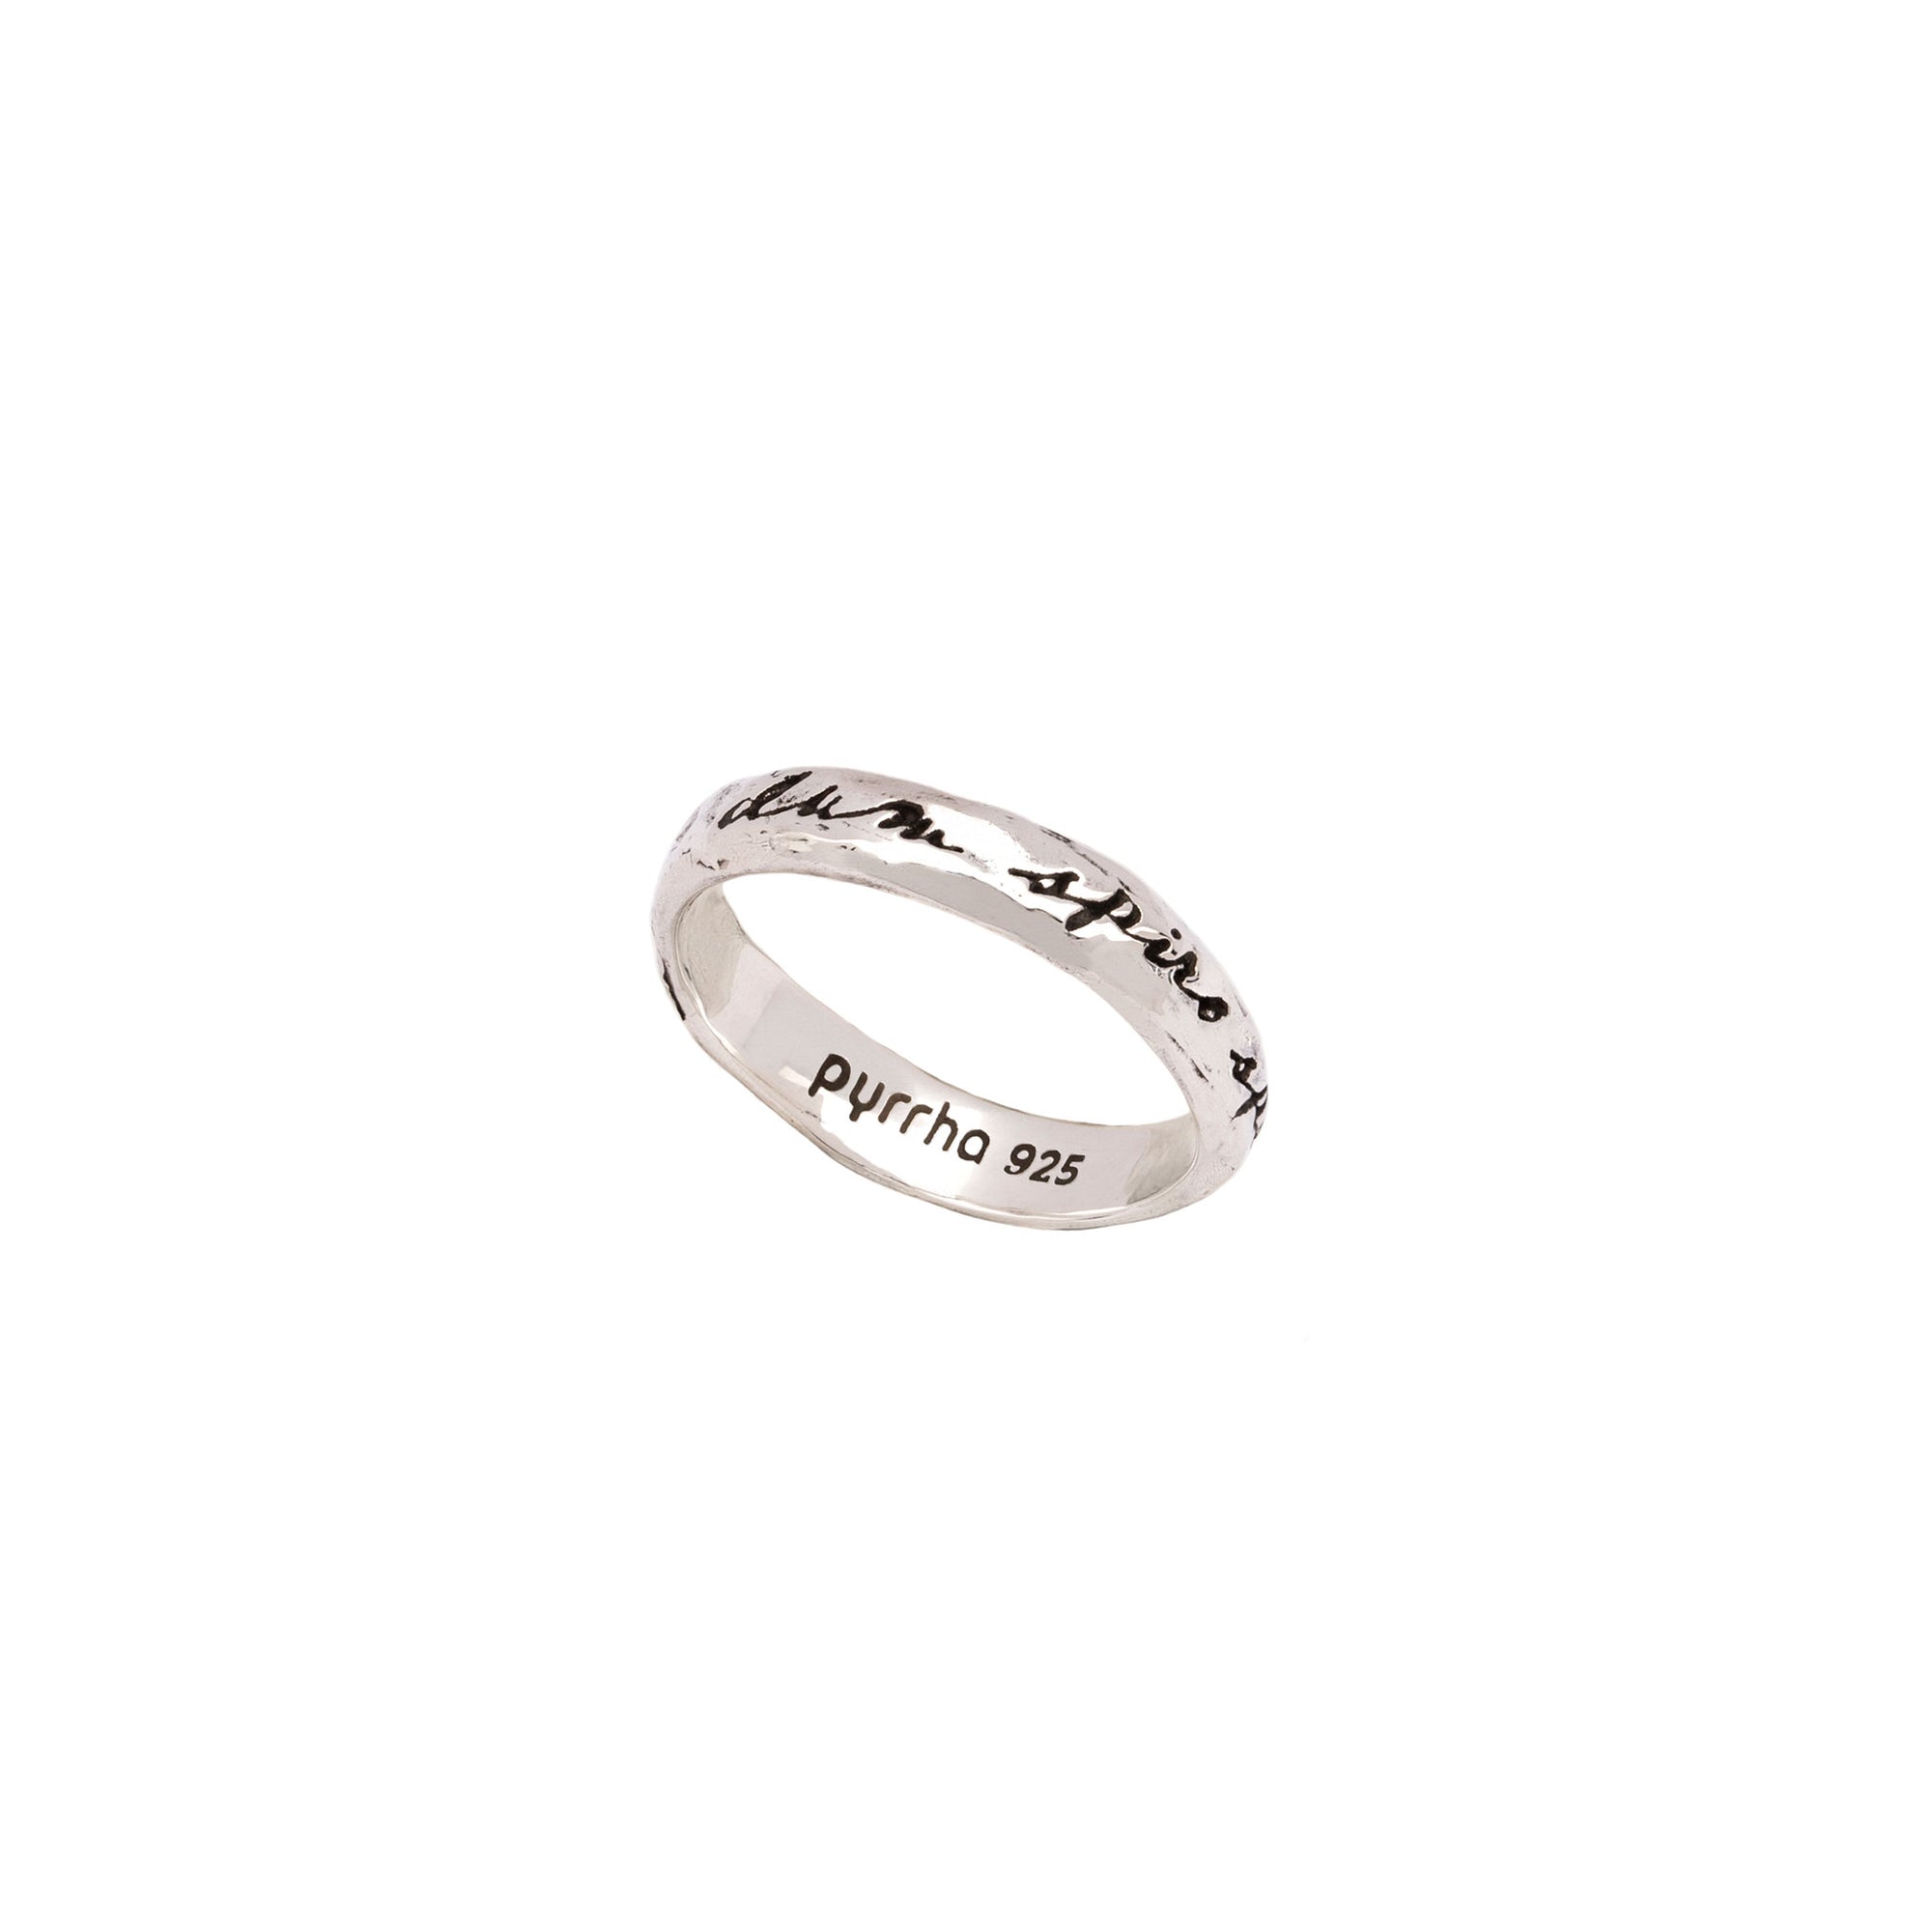 An silver band ring engraved with latin meaning while I breathe hope